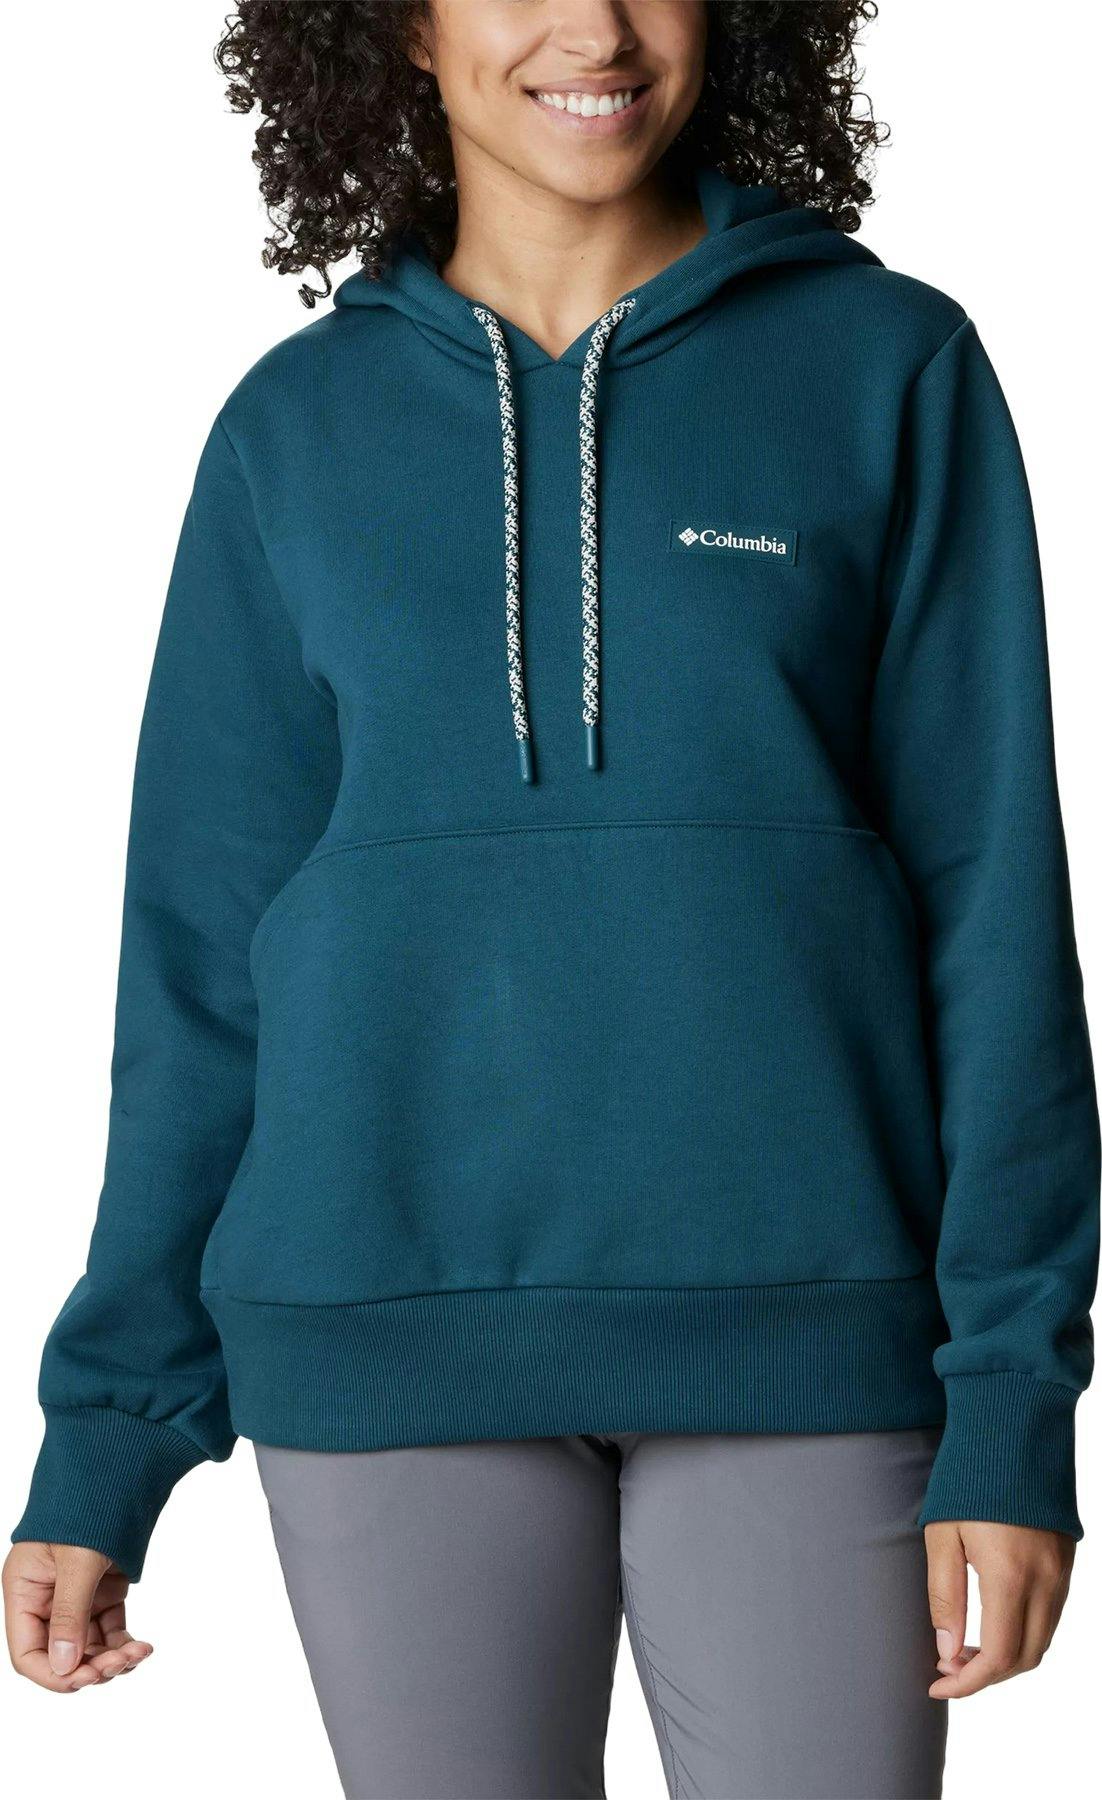 Product image for Marble Canyon Hoodie - Women's